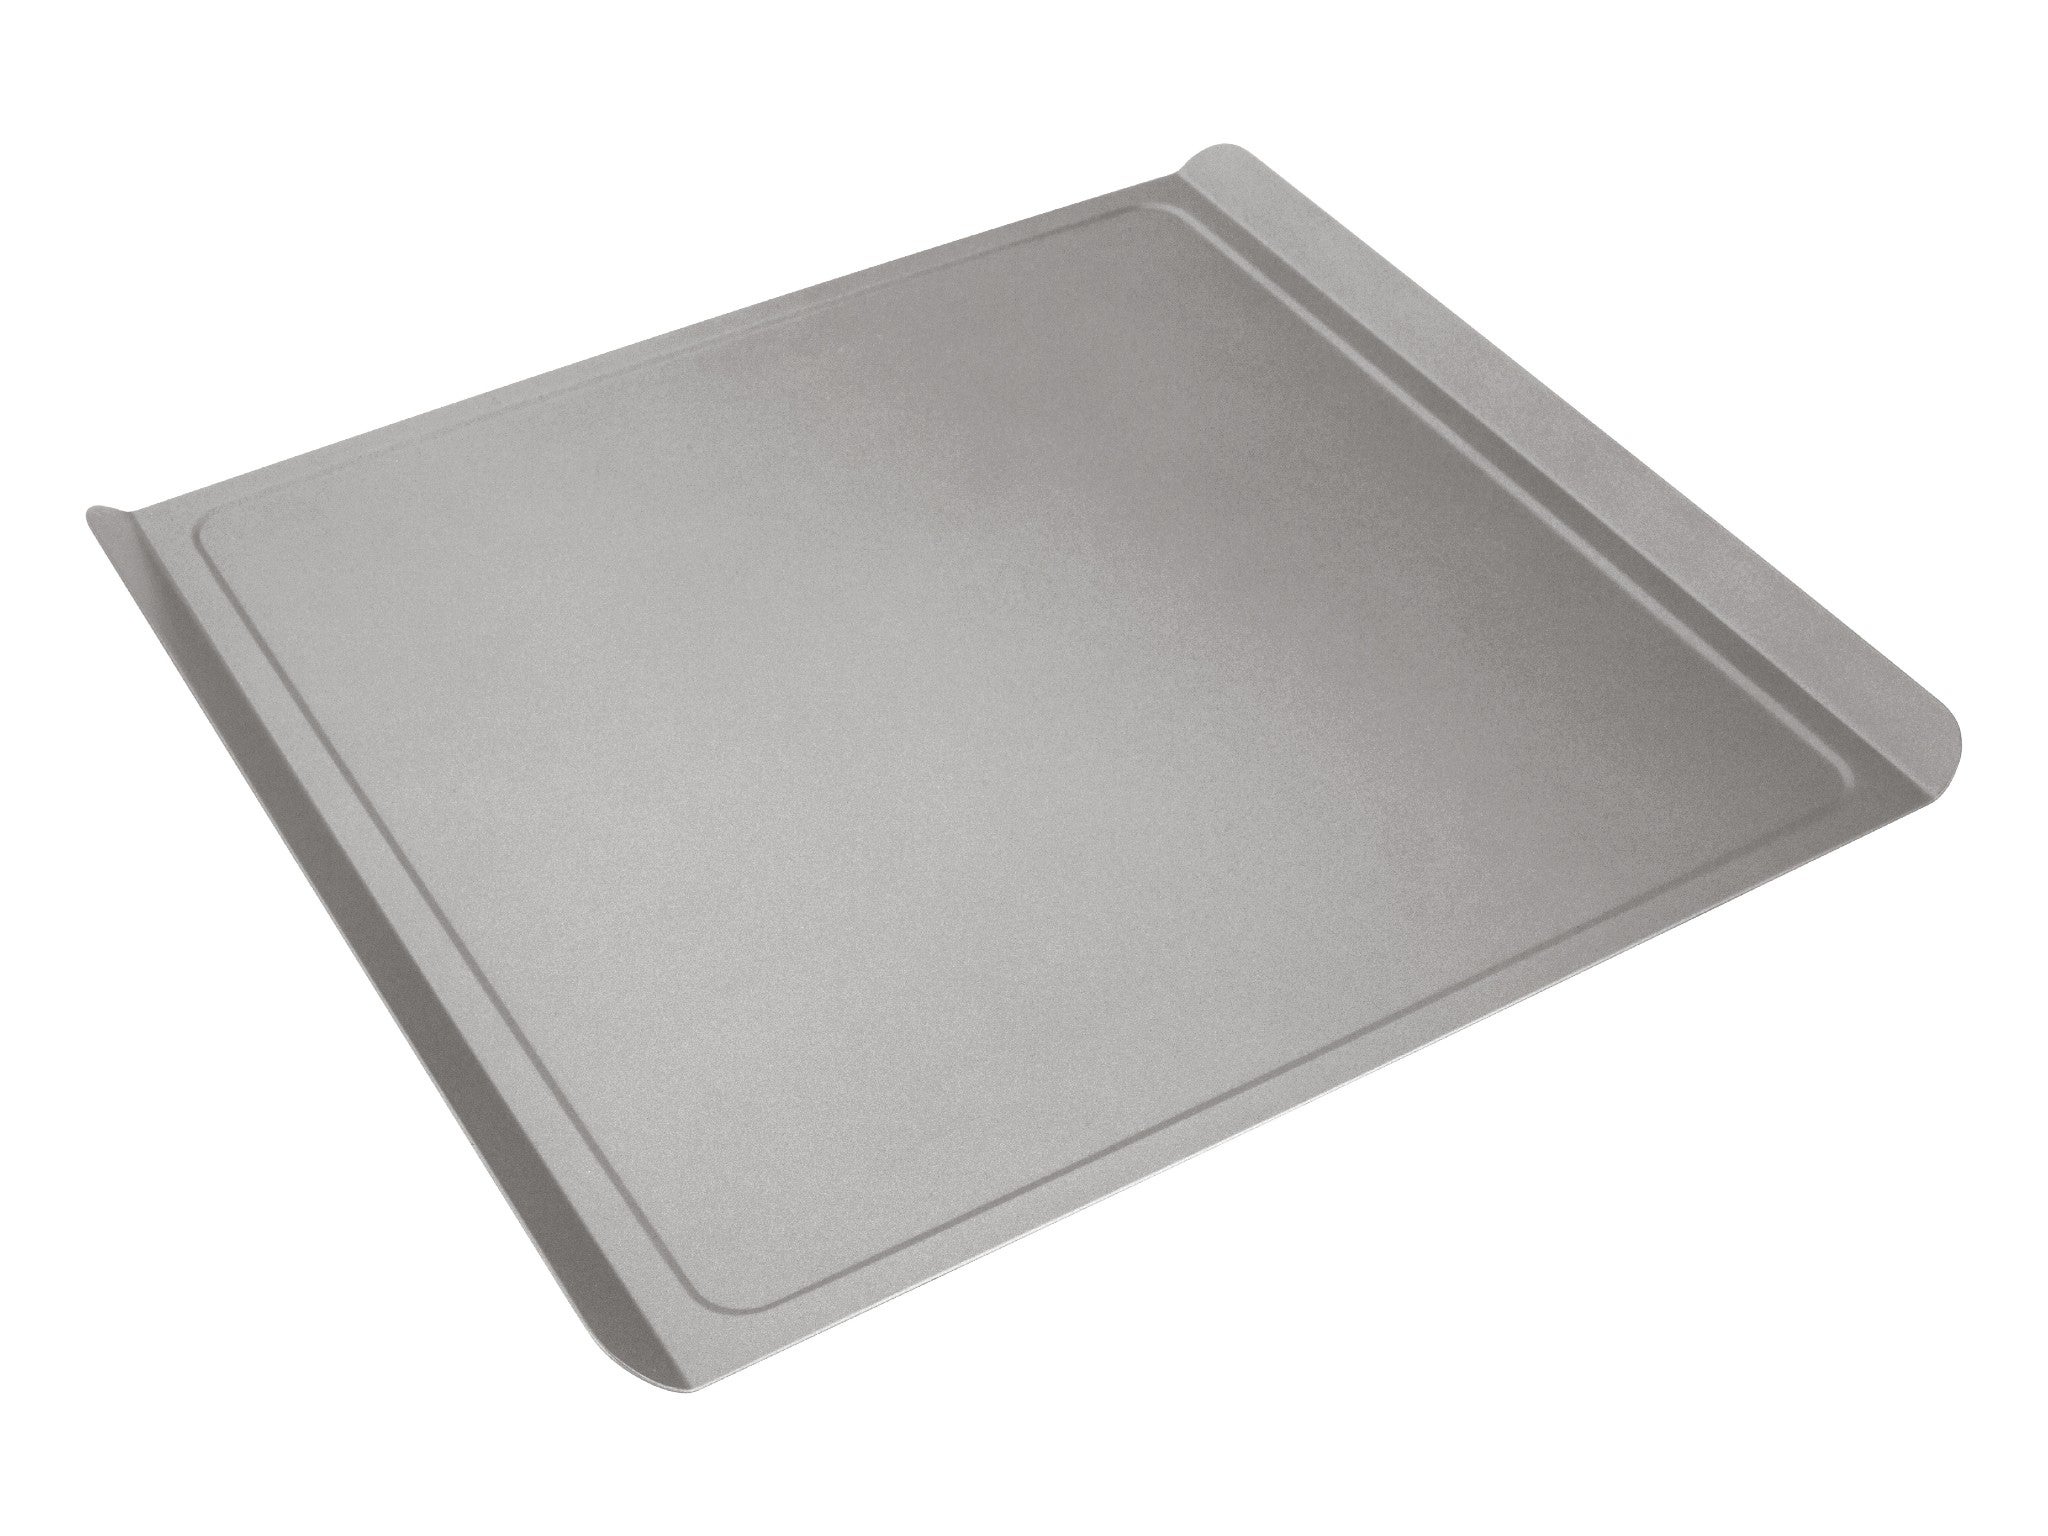 Large 36cm Flat Non Stick Cookie Biscuit Oven Baking Sheet Tray Sheet